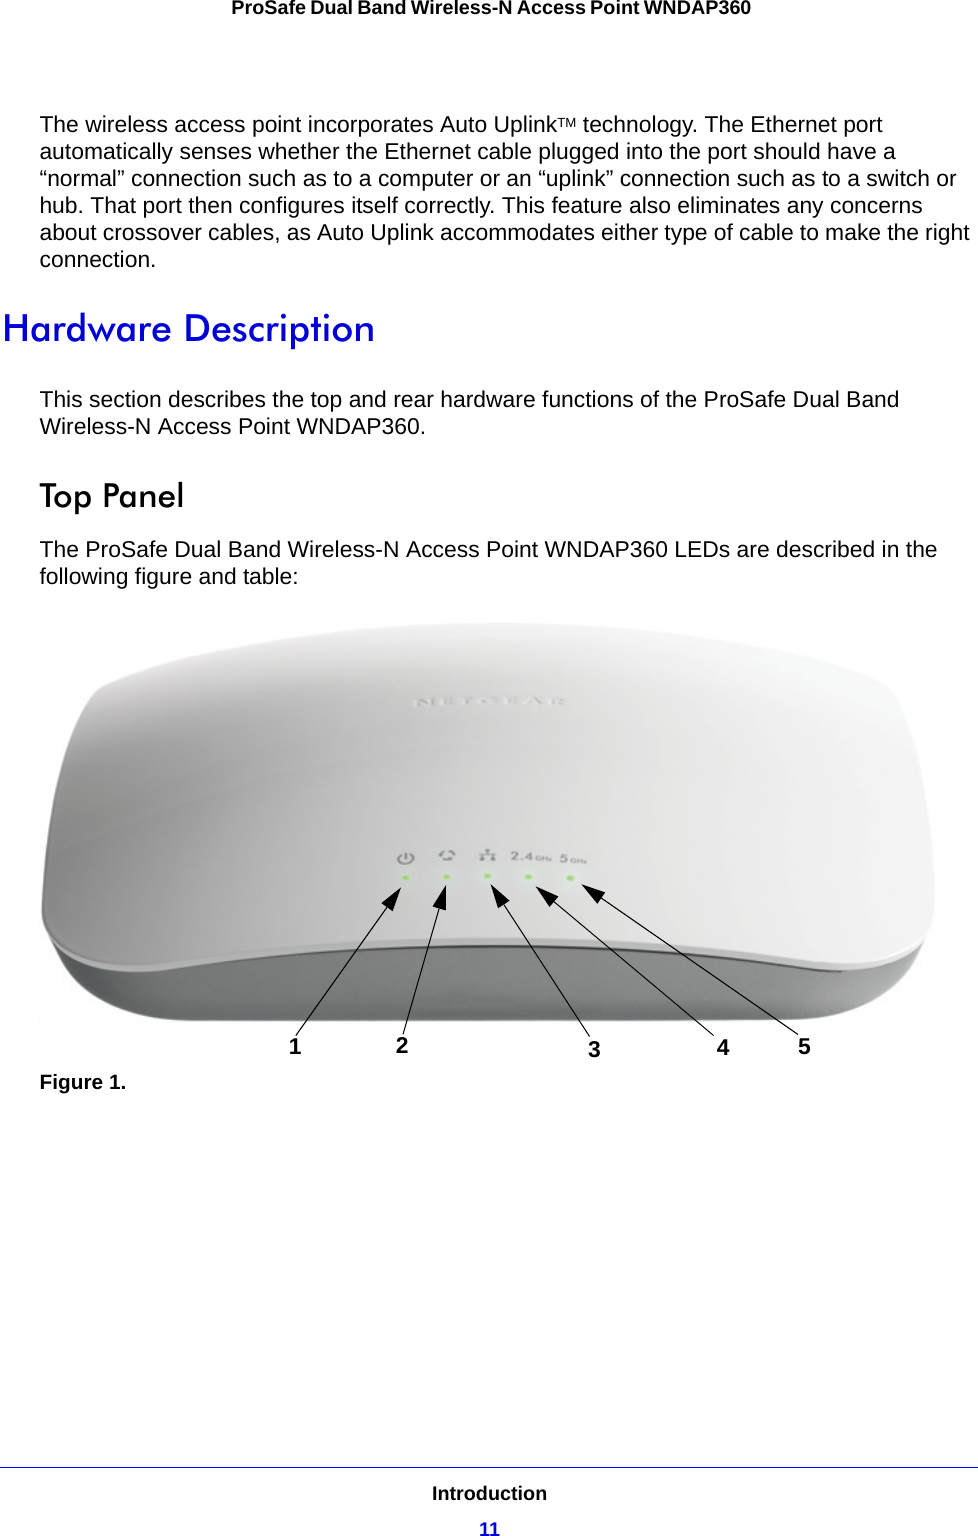 Introduction11 ProSafe Dual Band Wireless-N Access Point WNDAP360The wireless access point incorporates Auto UplinkTM technology. The Ethernet port automatically senses whether the Ethernet cable plugged into the port should have a “normal” connection such as to a computer or an “uplink” connection such as to a switch or hub. That port then configures itself correctly. This feature also eliminates any concerns about crossover cables, as Auto Uplink accommodates either type of cable to make the right connection.Hardware Description This section describes the top and rear hardware functions of the ProSafe Dual Band Wireless-N Access Point WNDAP360.Top PanelThe ProSafe Dual Band Wireless-N Access Point WNDAP360 LEDs are described in the following figure and table:Figure 1. 12345